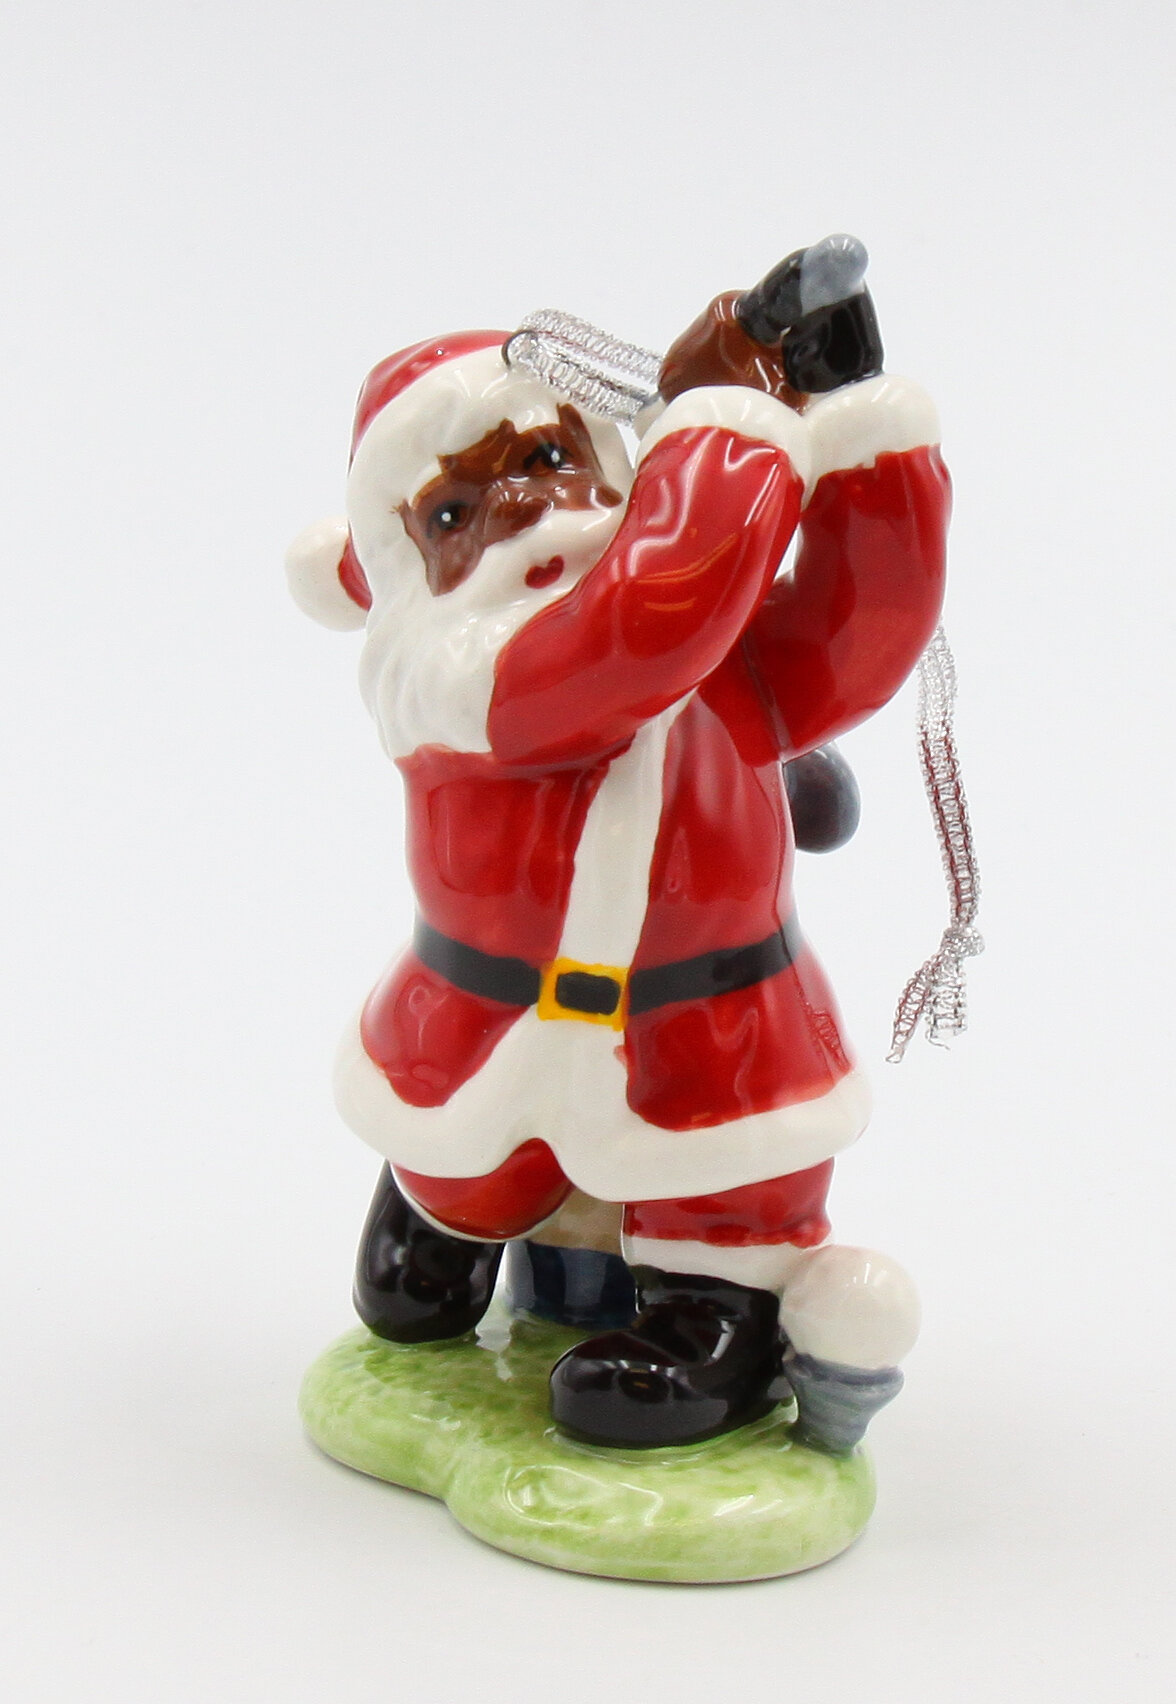 The Holiday Aisle® Ceramic Hanging Figurine Ornament